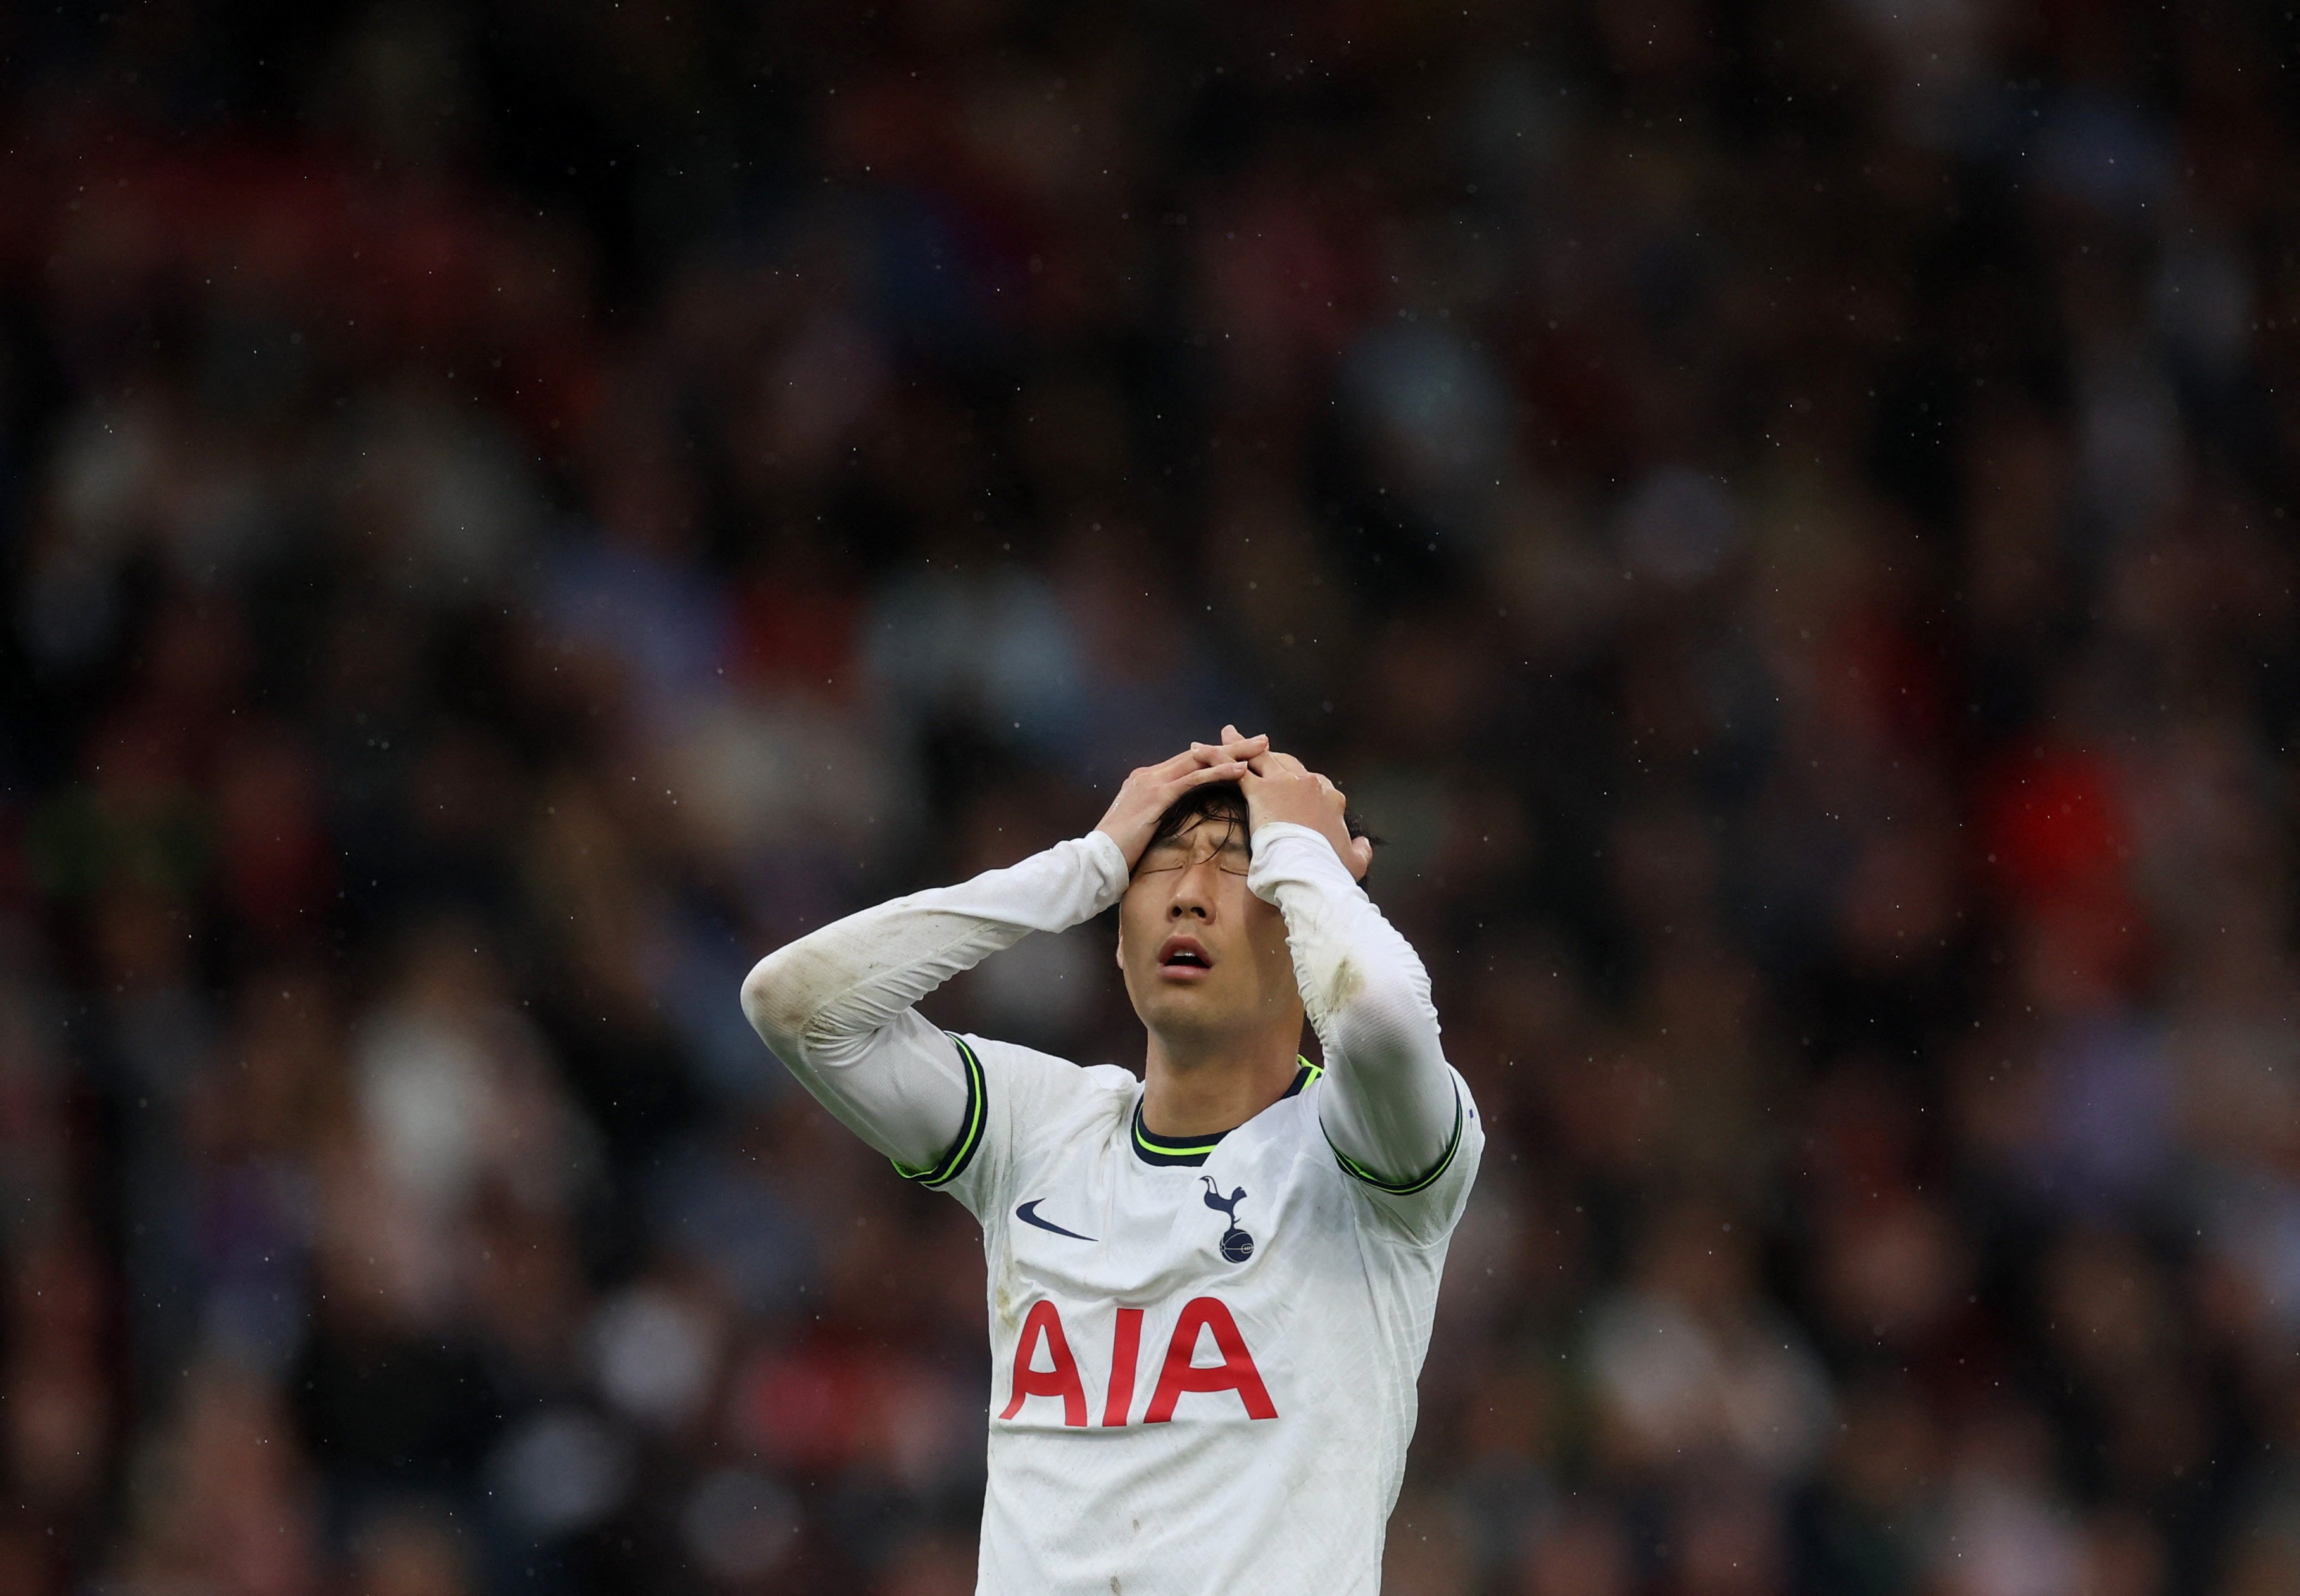 AIA sponsorship is stain on Spurs shirts, say Kick Out Coal